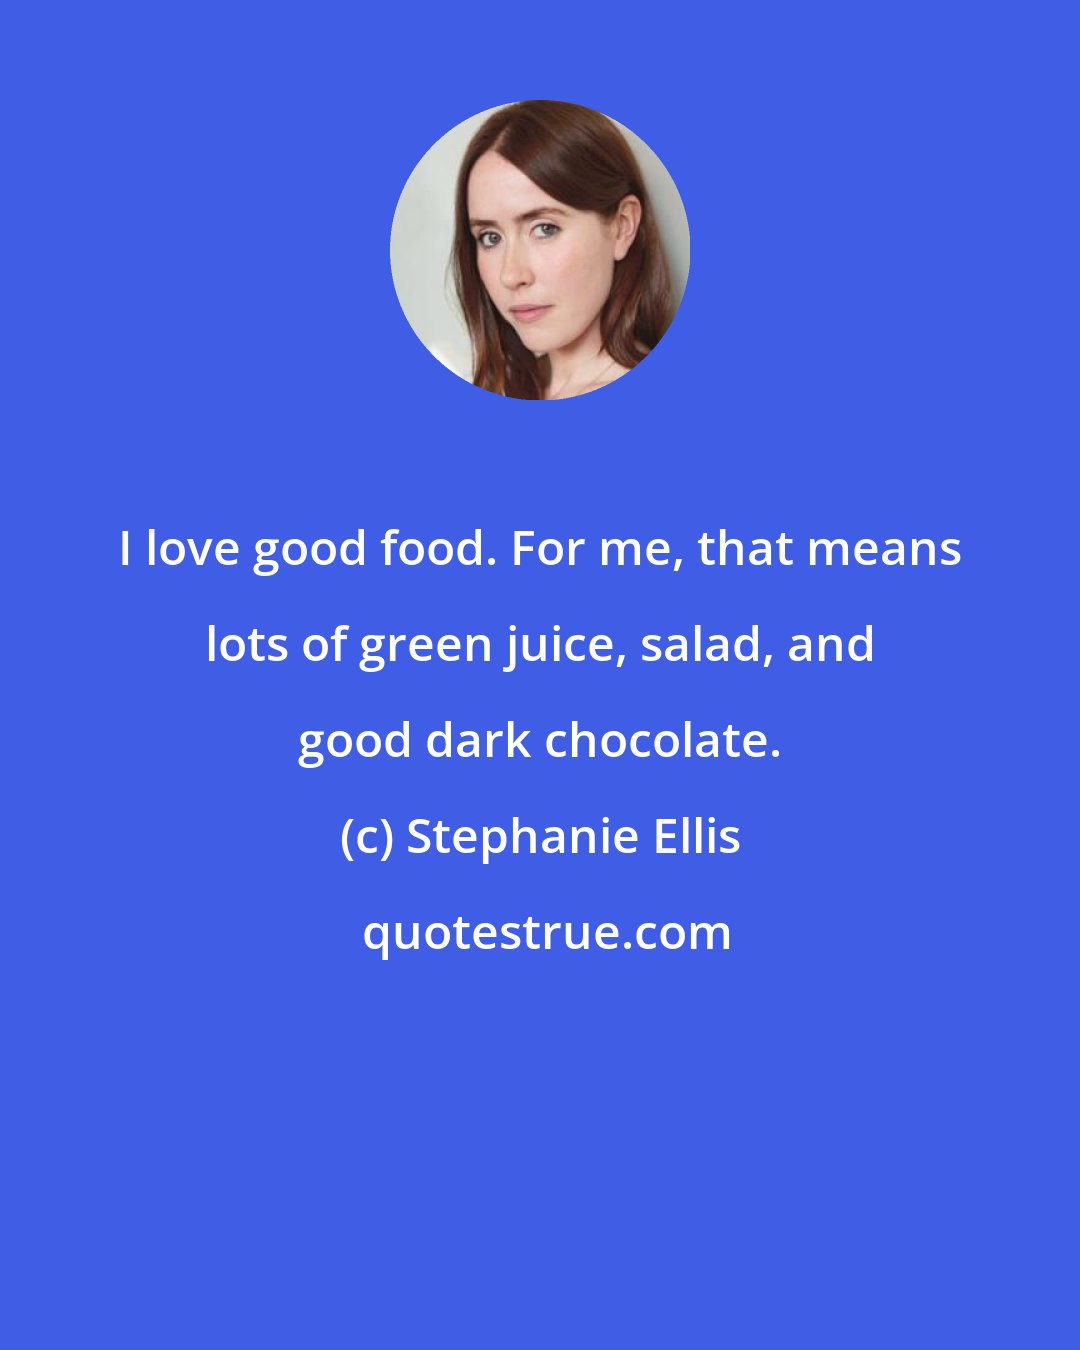 Stephanie Ellis: I love good food. For me, that means lots of green juice, salad, and good dark chocolate.